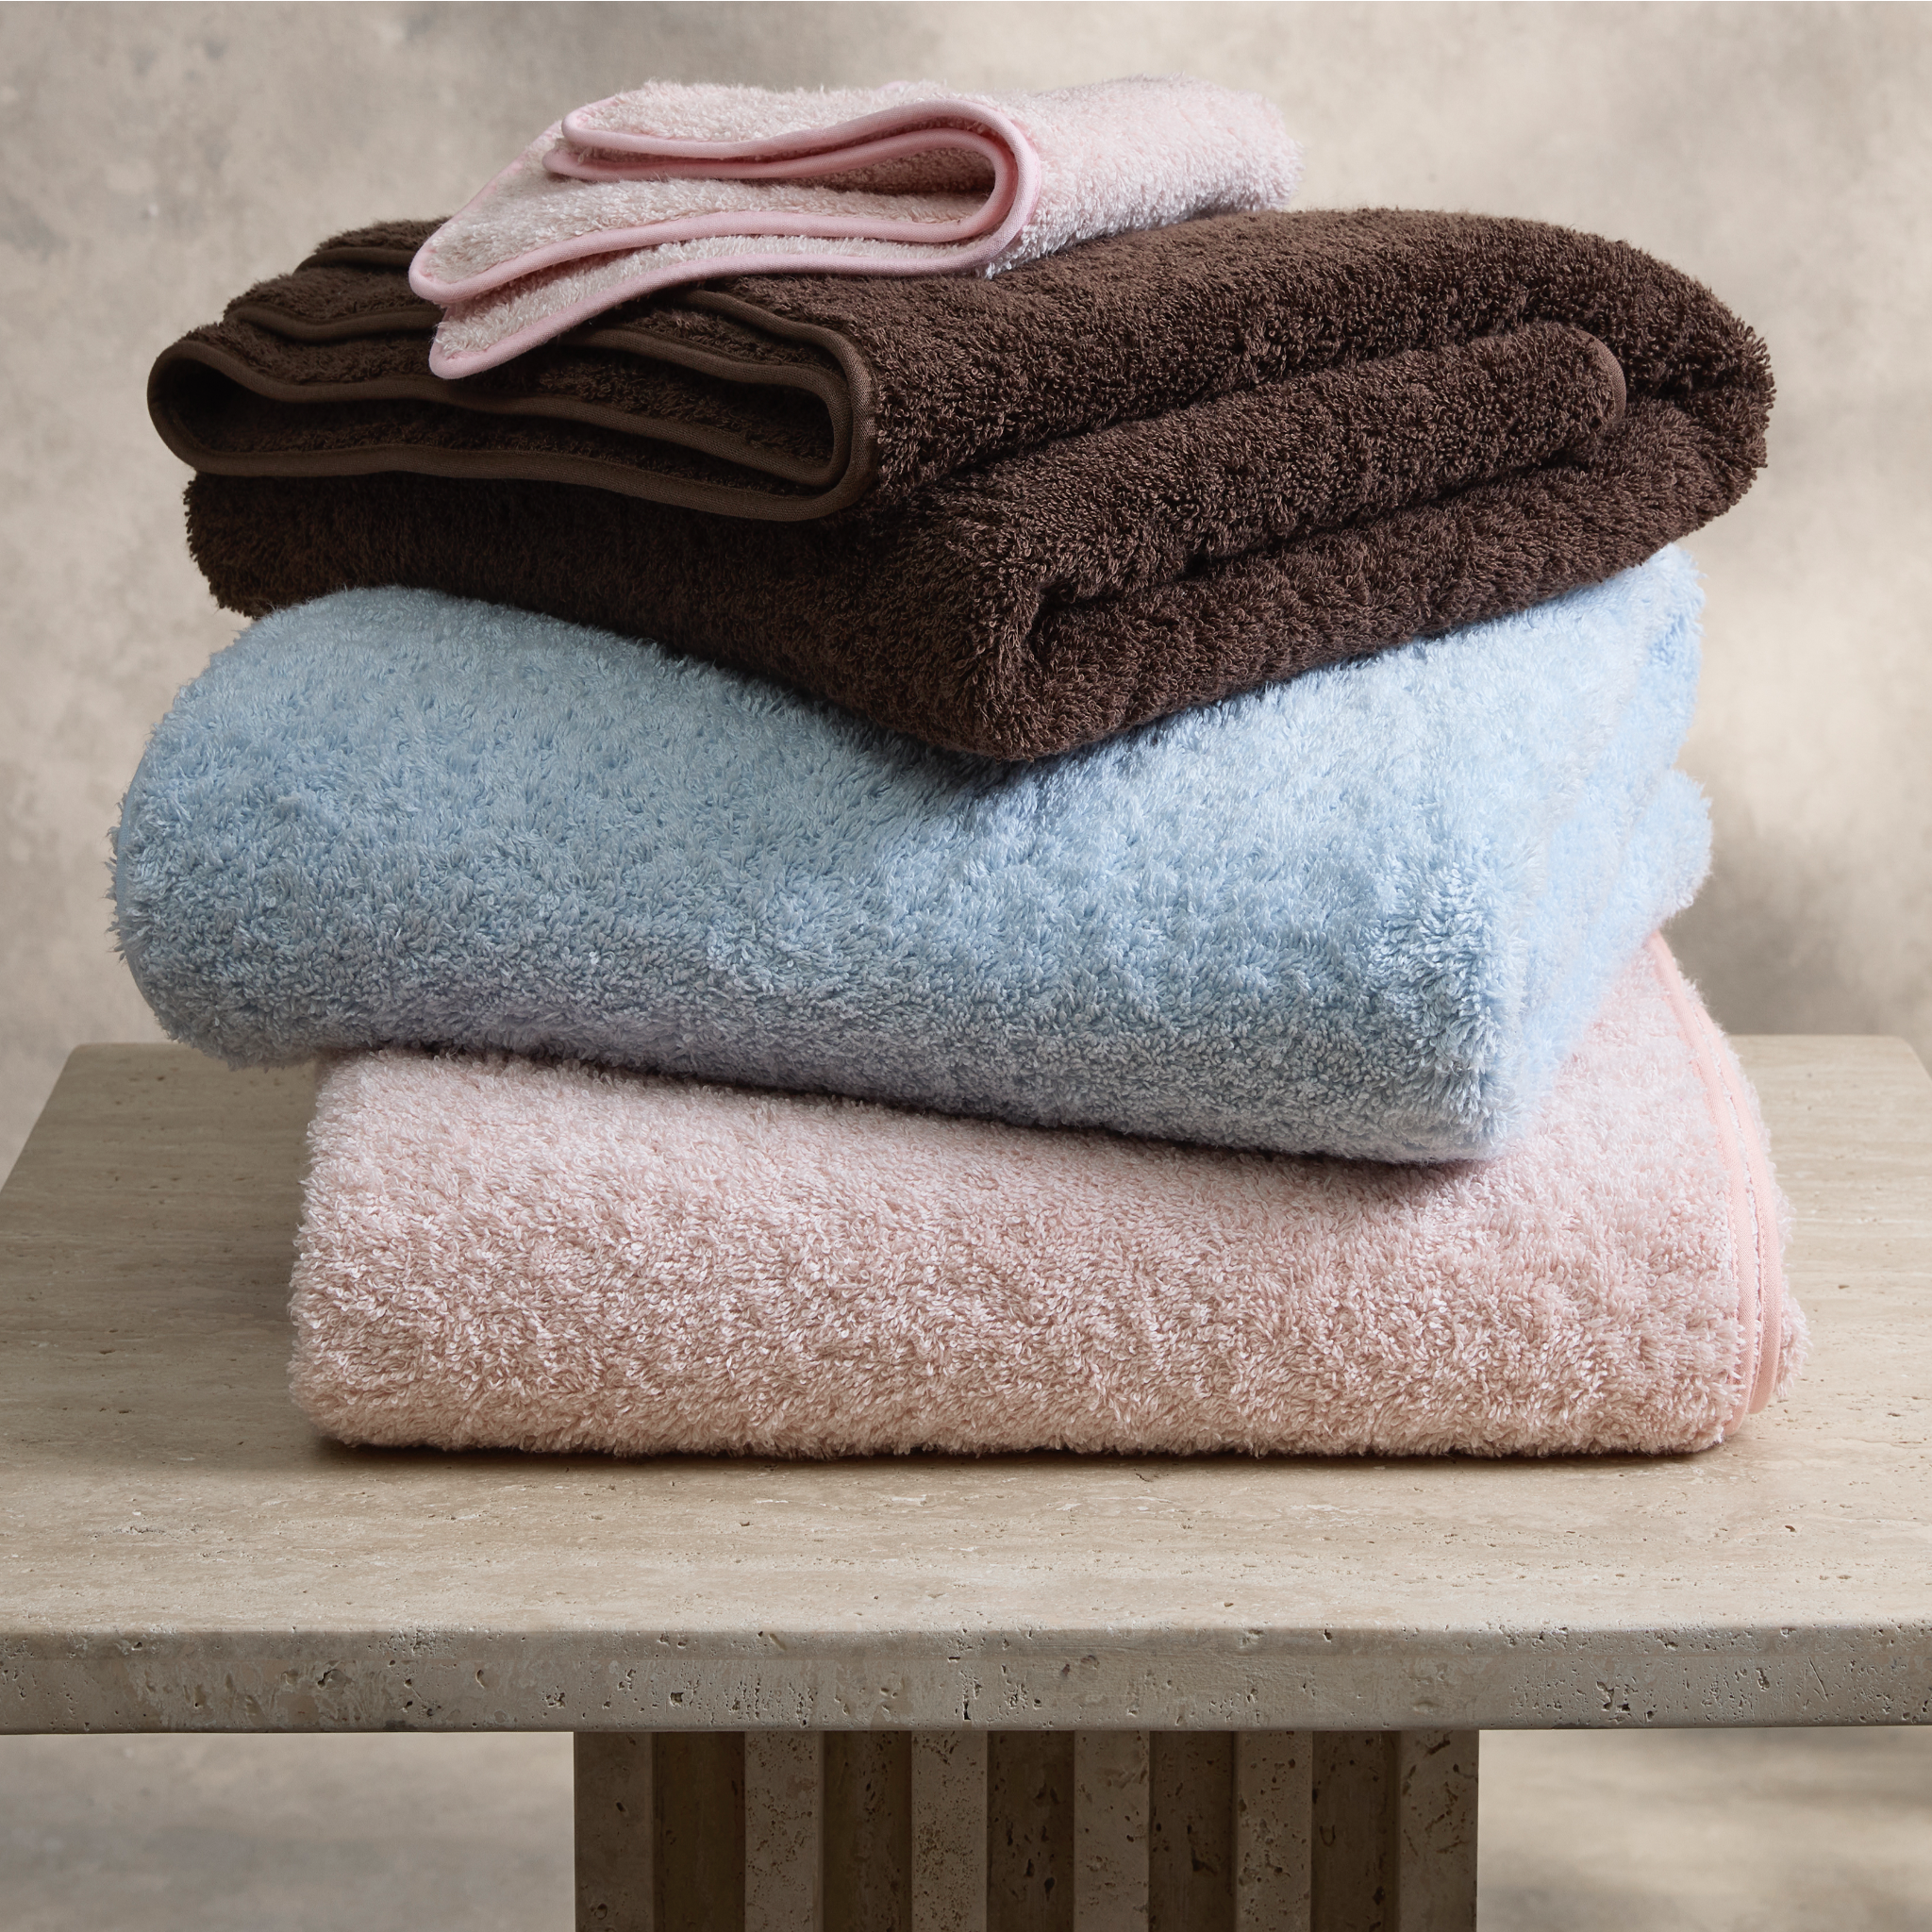 Charisma Bath Towels and Sheets on Sale (Find the Lowest Prices!)